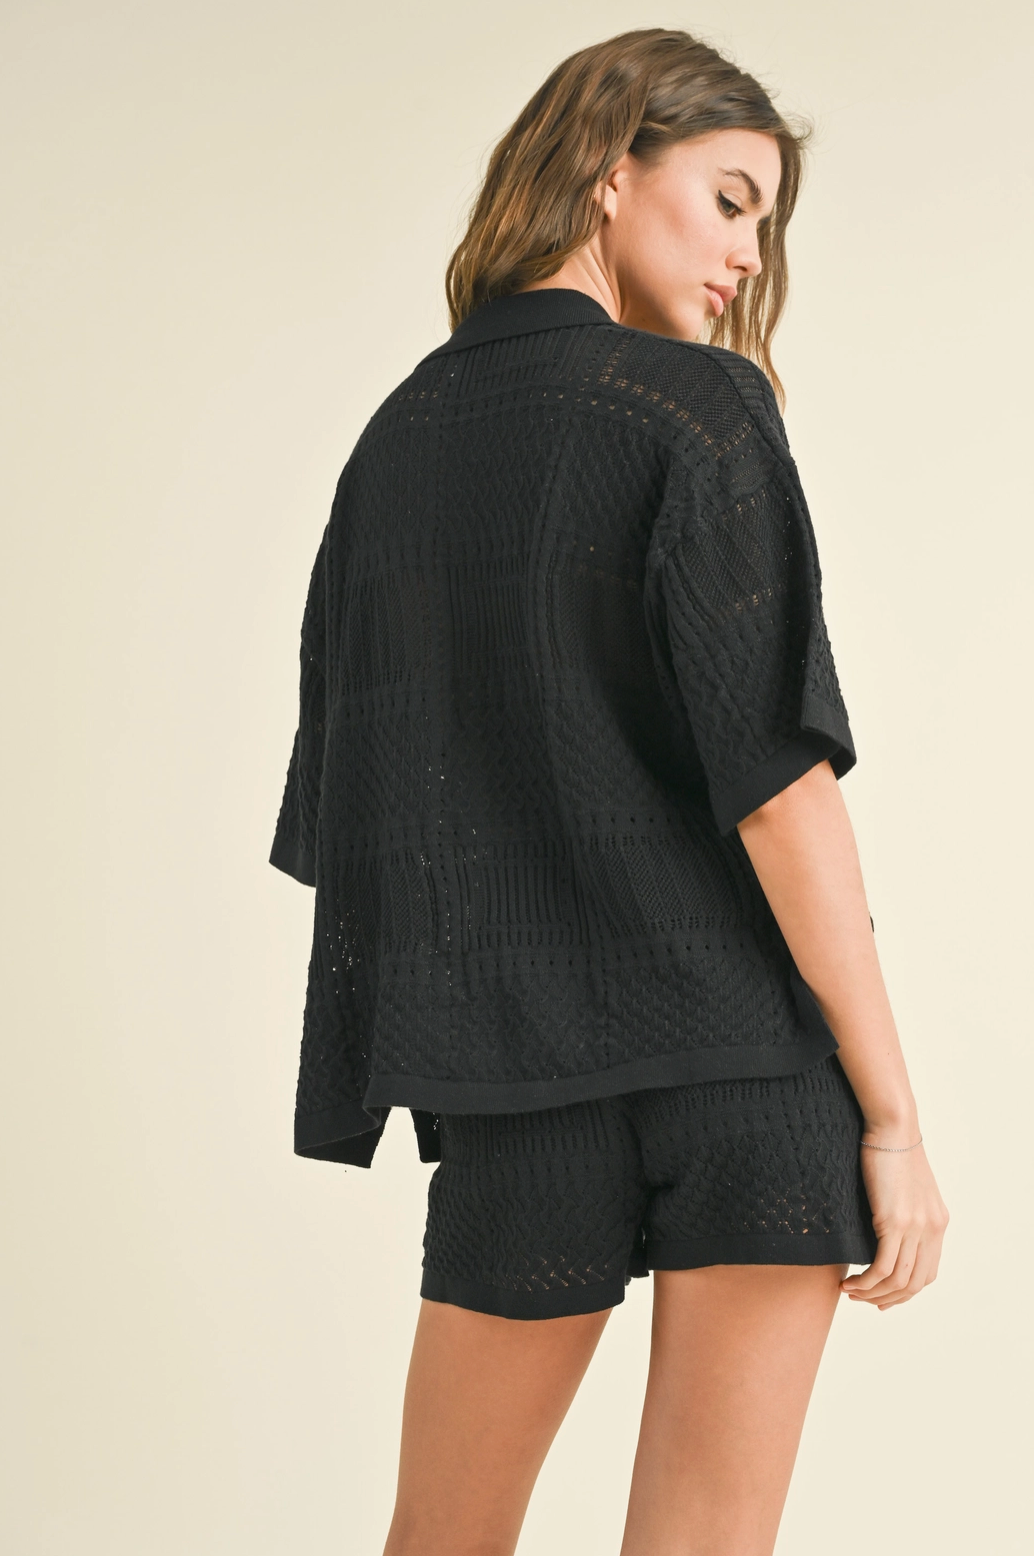 Mix Pattern Knitted Top in Black